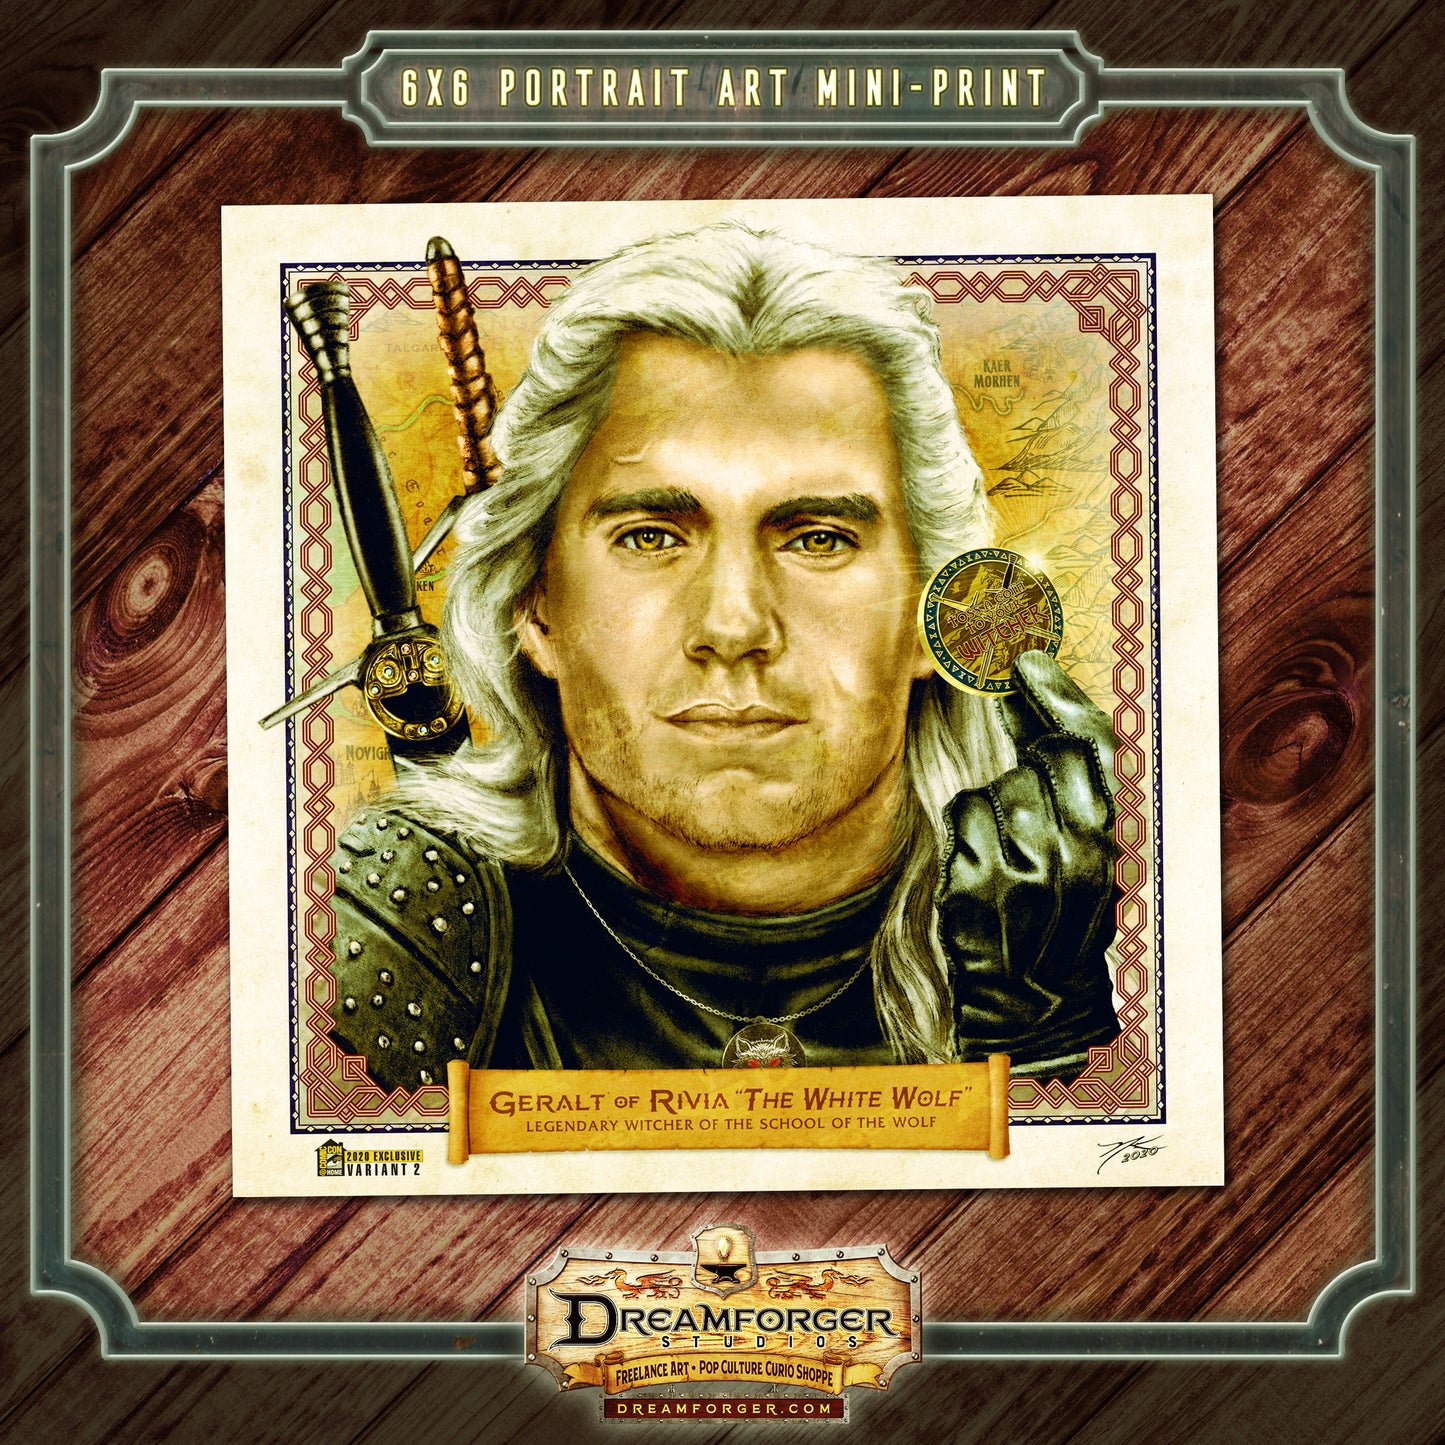 "Geralt of Rivia (The White Wolf)" Portrait Art Mini-Print (SDCC Exclusive Variant 2) • Run of 100